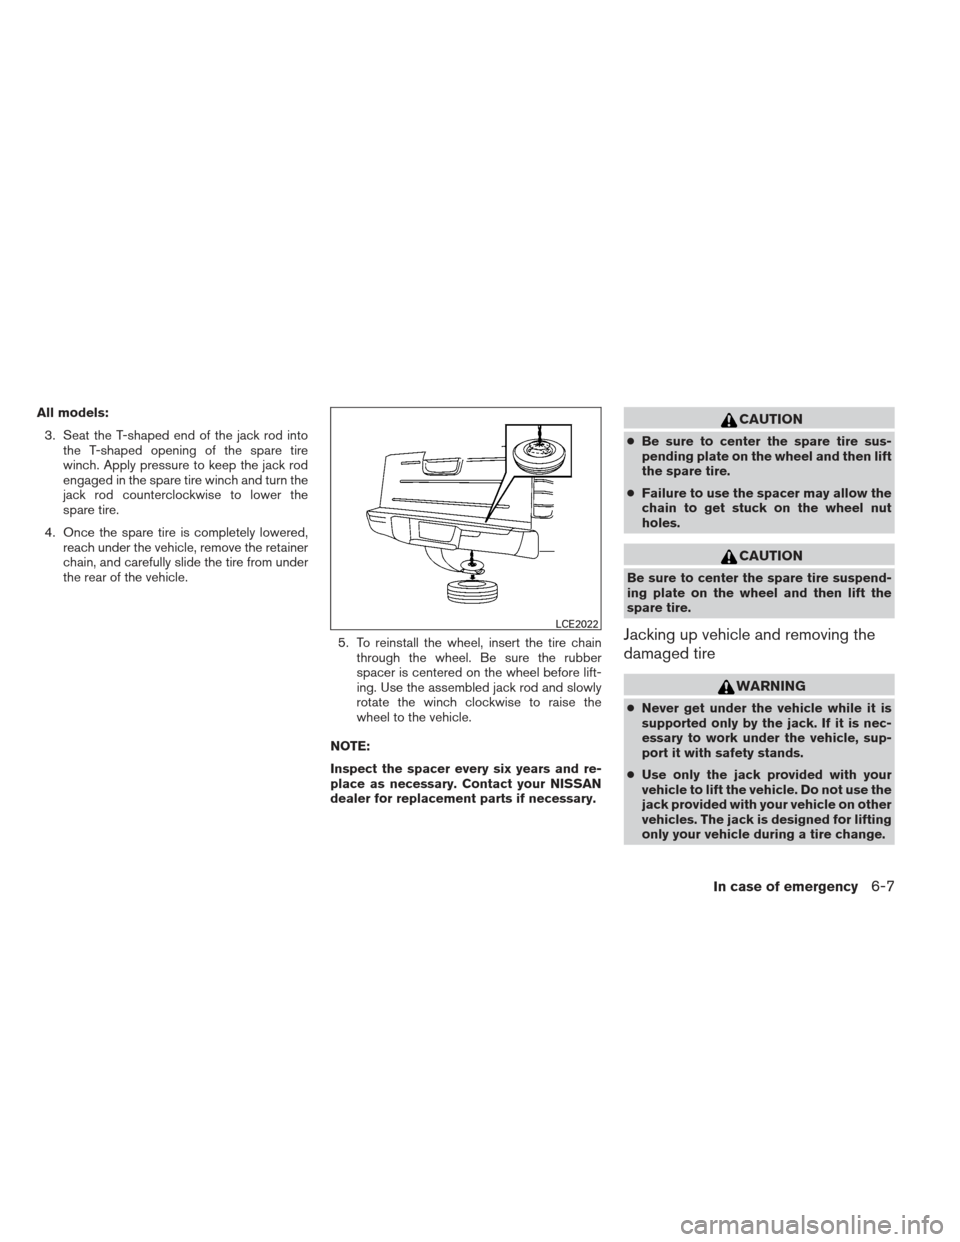 NISSAN FRONTIER 2013 D40 / 2.G Owners Manual All models:3. Seat the T-shaped end of the jack rod into the T-shaped opening of the spare tire
winch. Apply pressure to keep the jack rod
engaged in the spare tire winch and turn the
jack rod counter